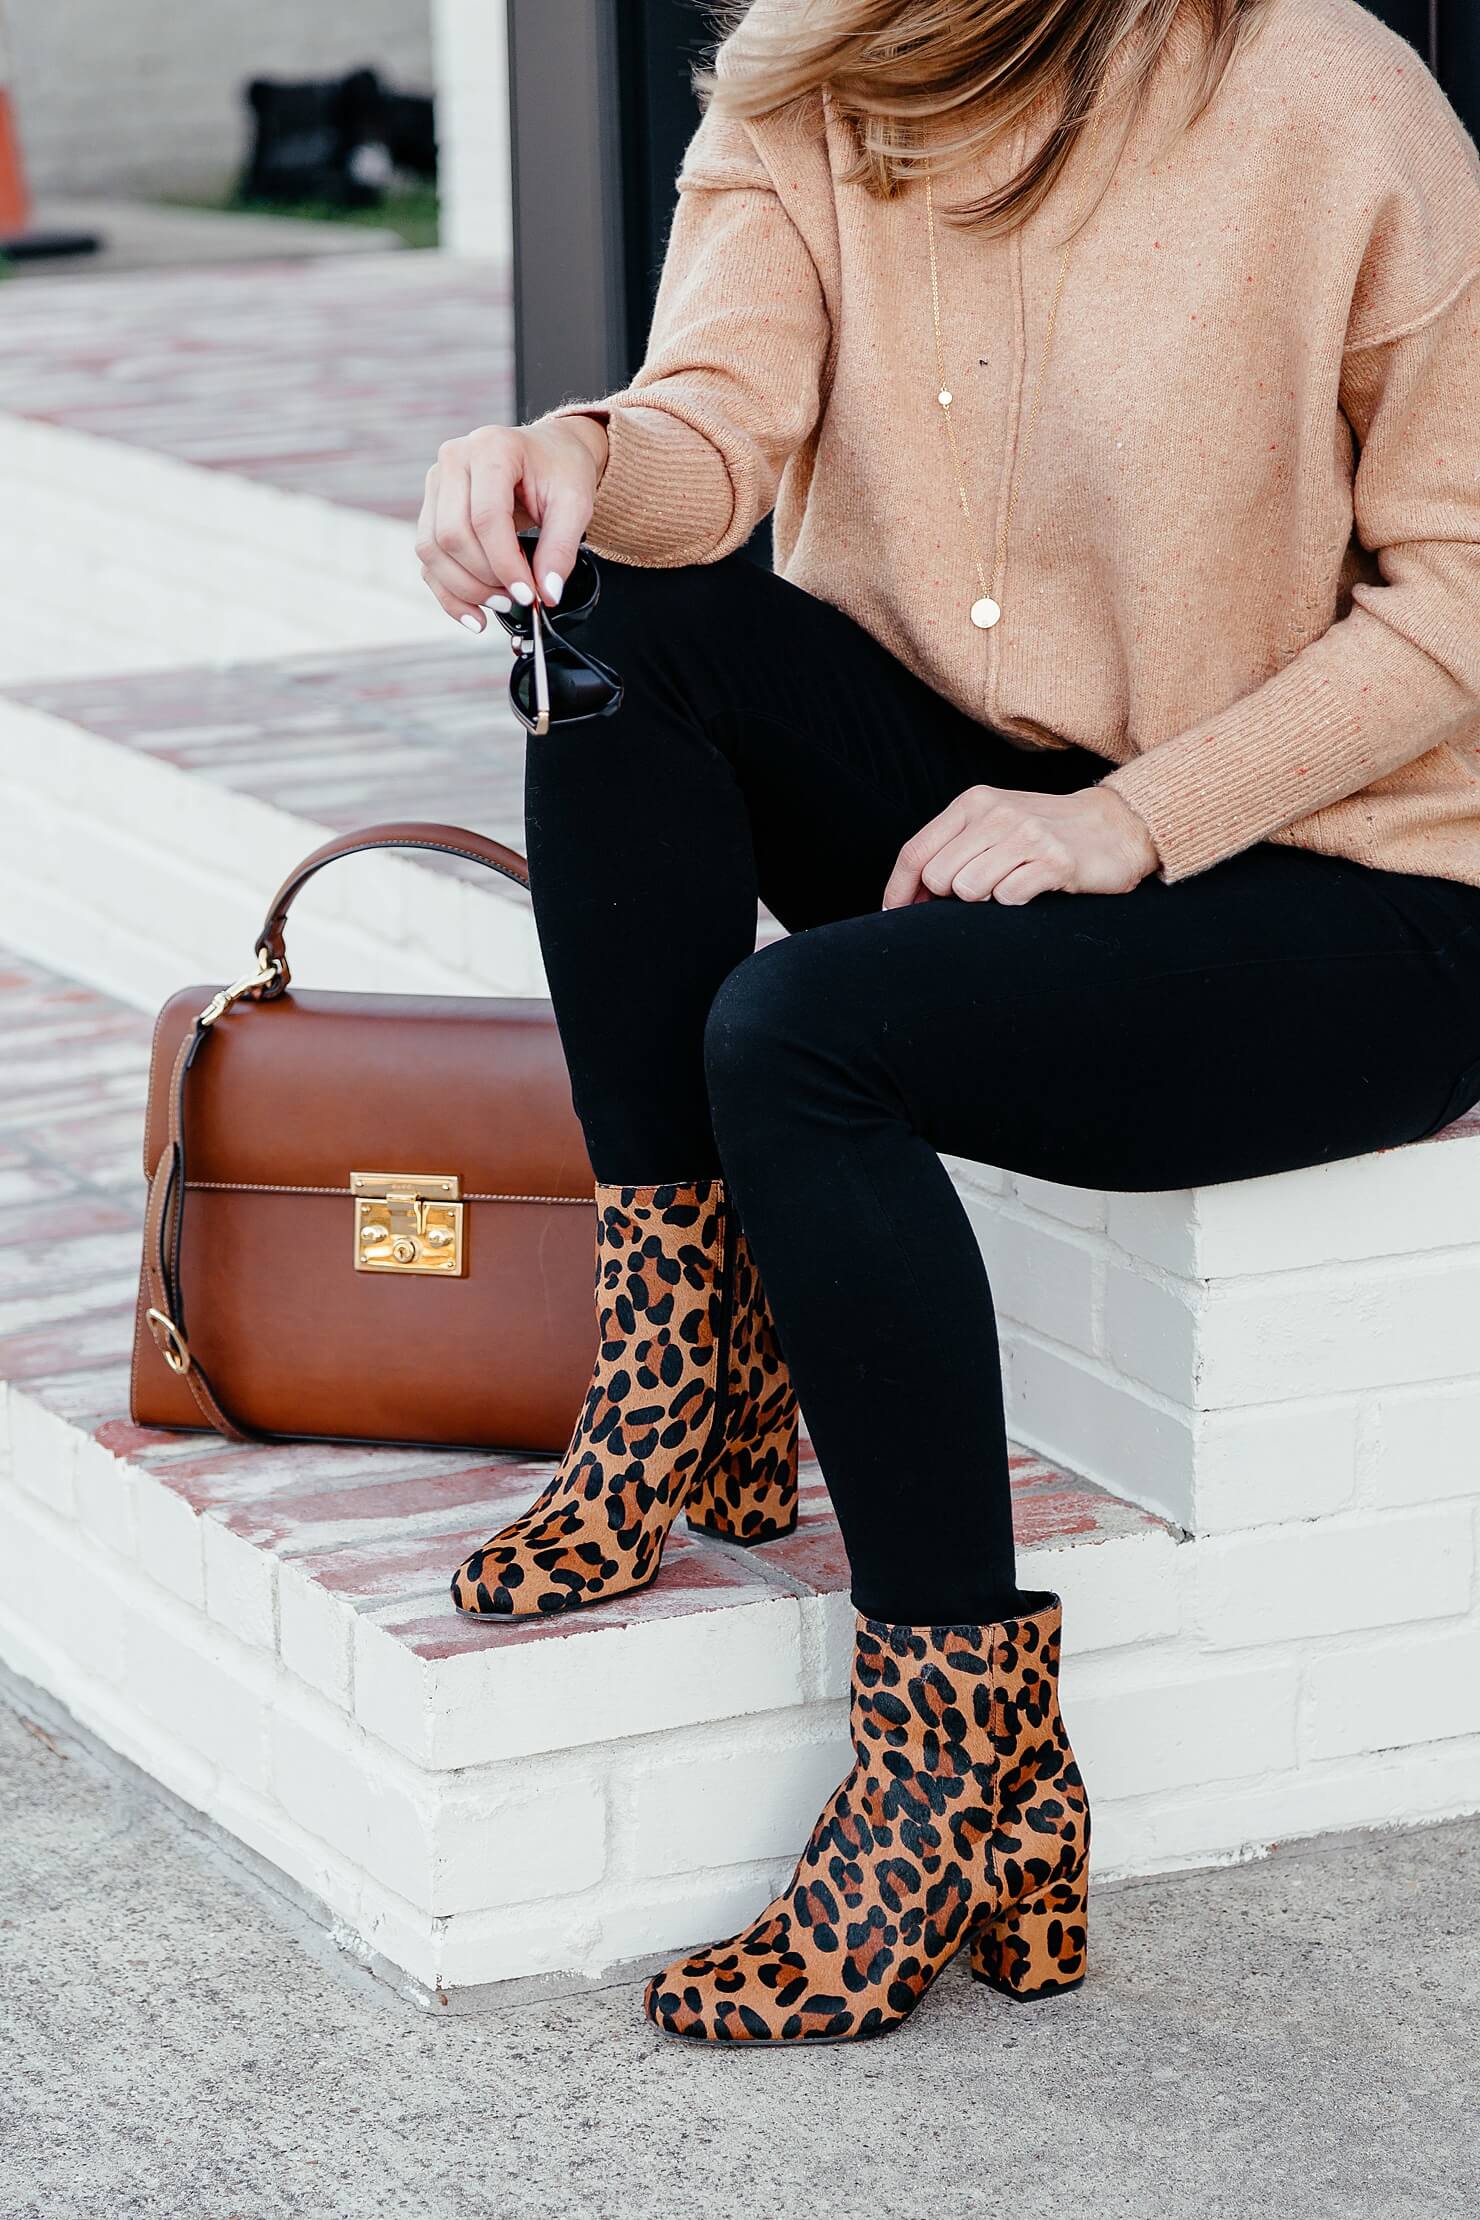 camel sweater, black jeans, leopard booties, brown leather bag, and black sunglasses